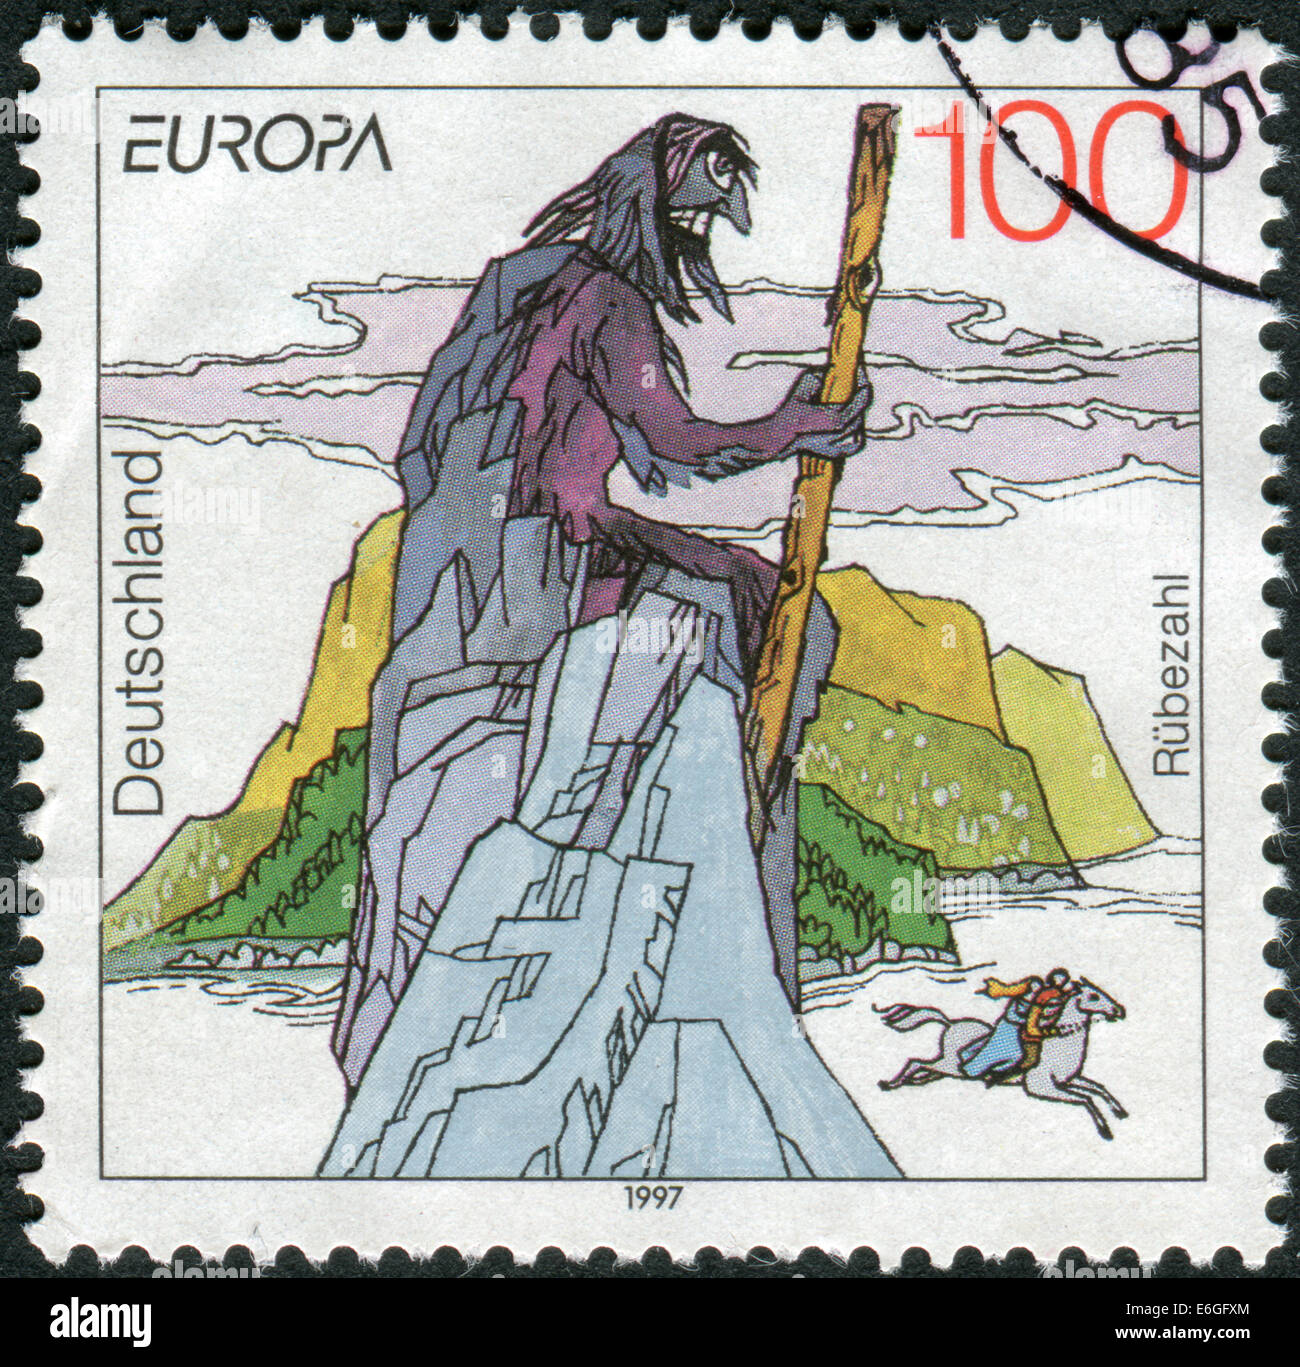 Postage stamp printed in Germany, dedicated to the sagas and legends, depicted Rubezahl of Riesengebirge (Giant Mountains) Stock Photo